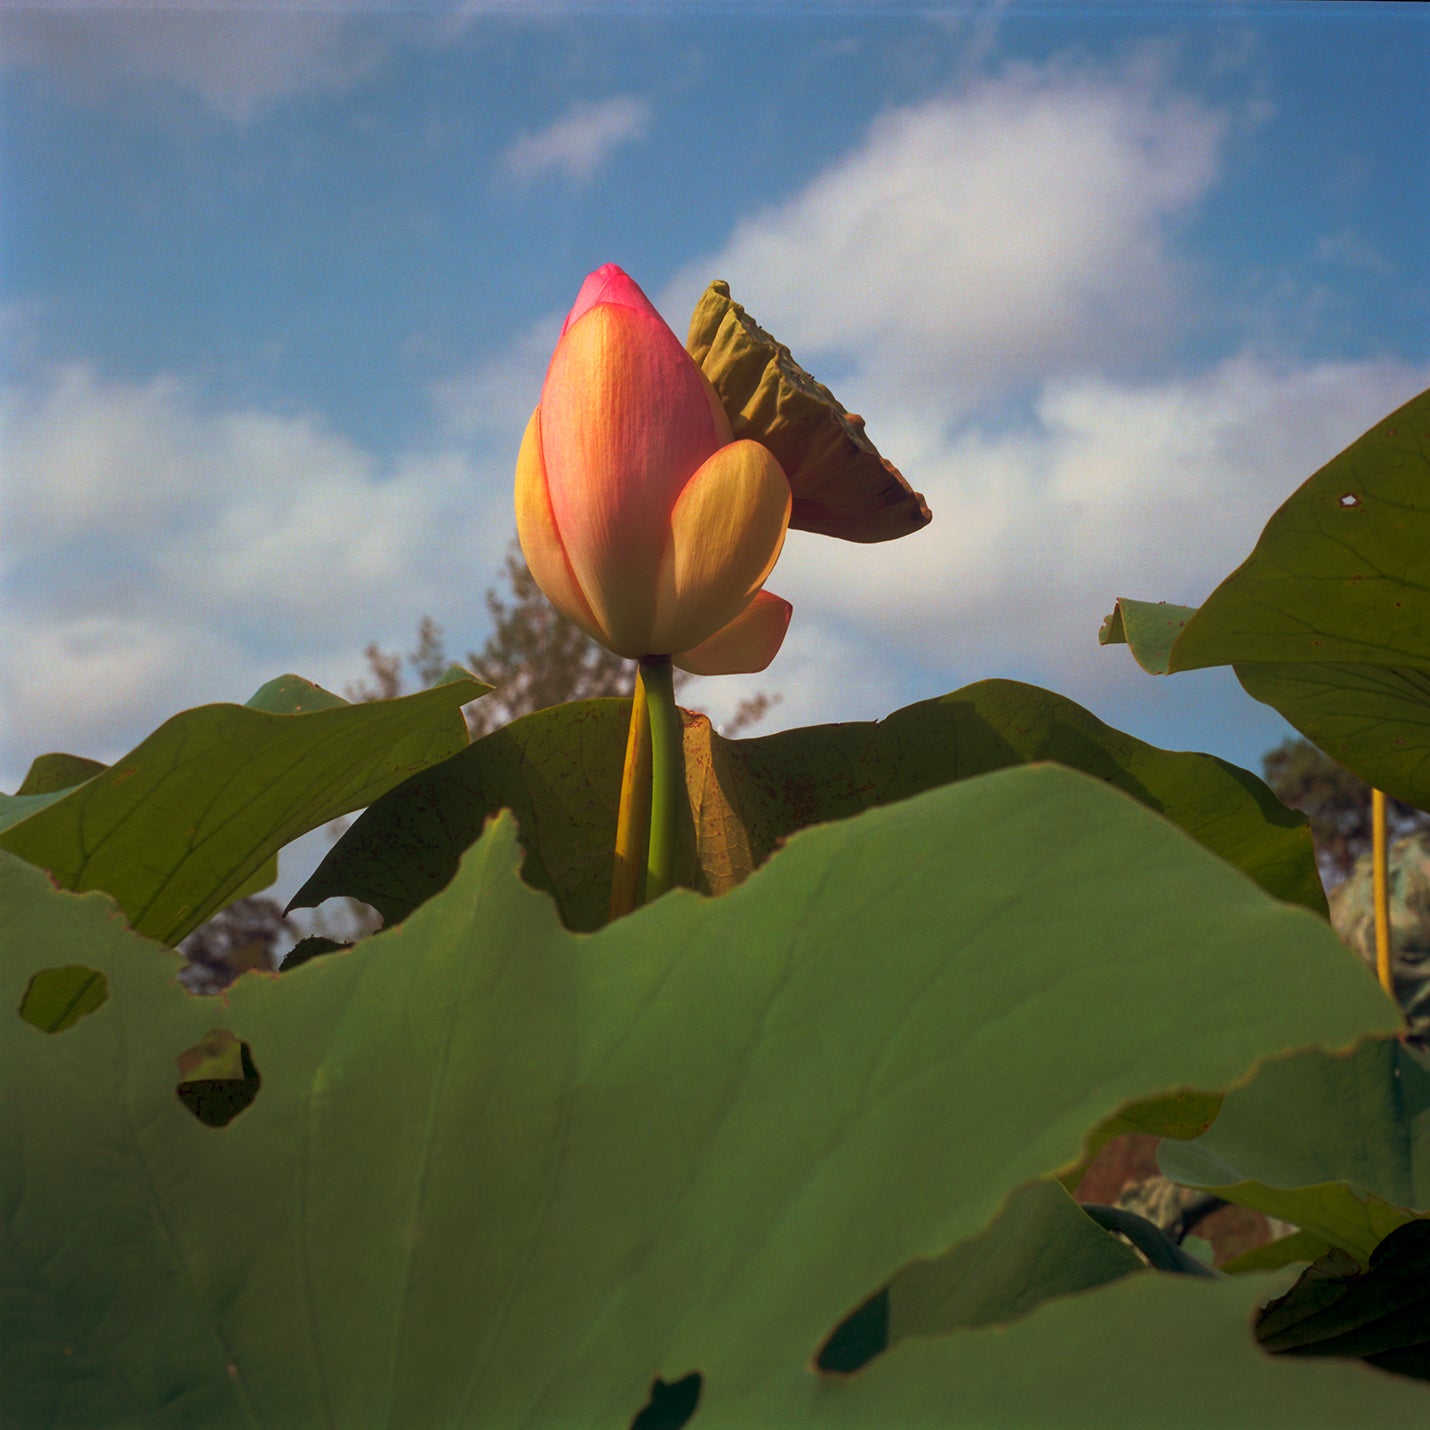 Bud, 2010, photography, 40 x 40 in. / 101.6 x 101.6 cm.